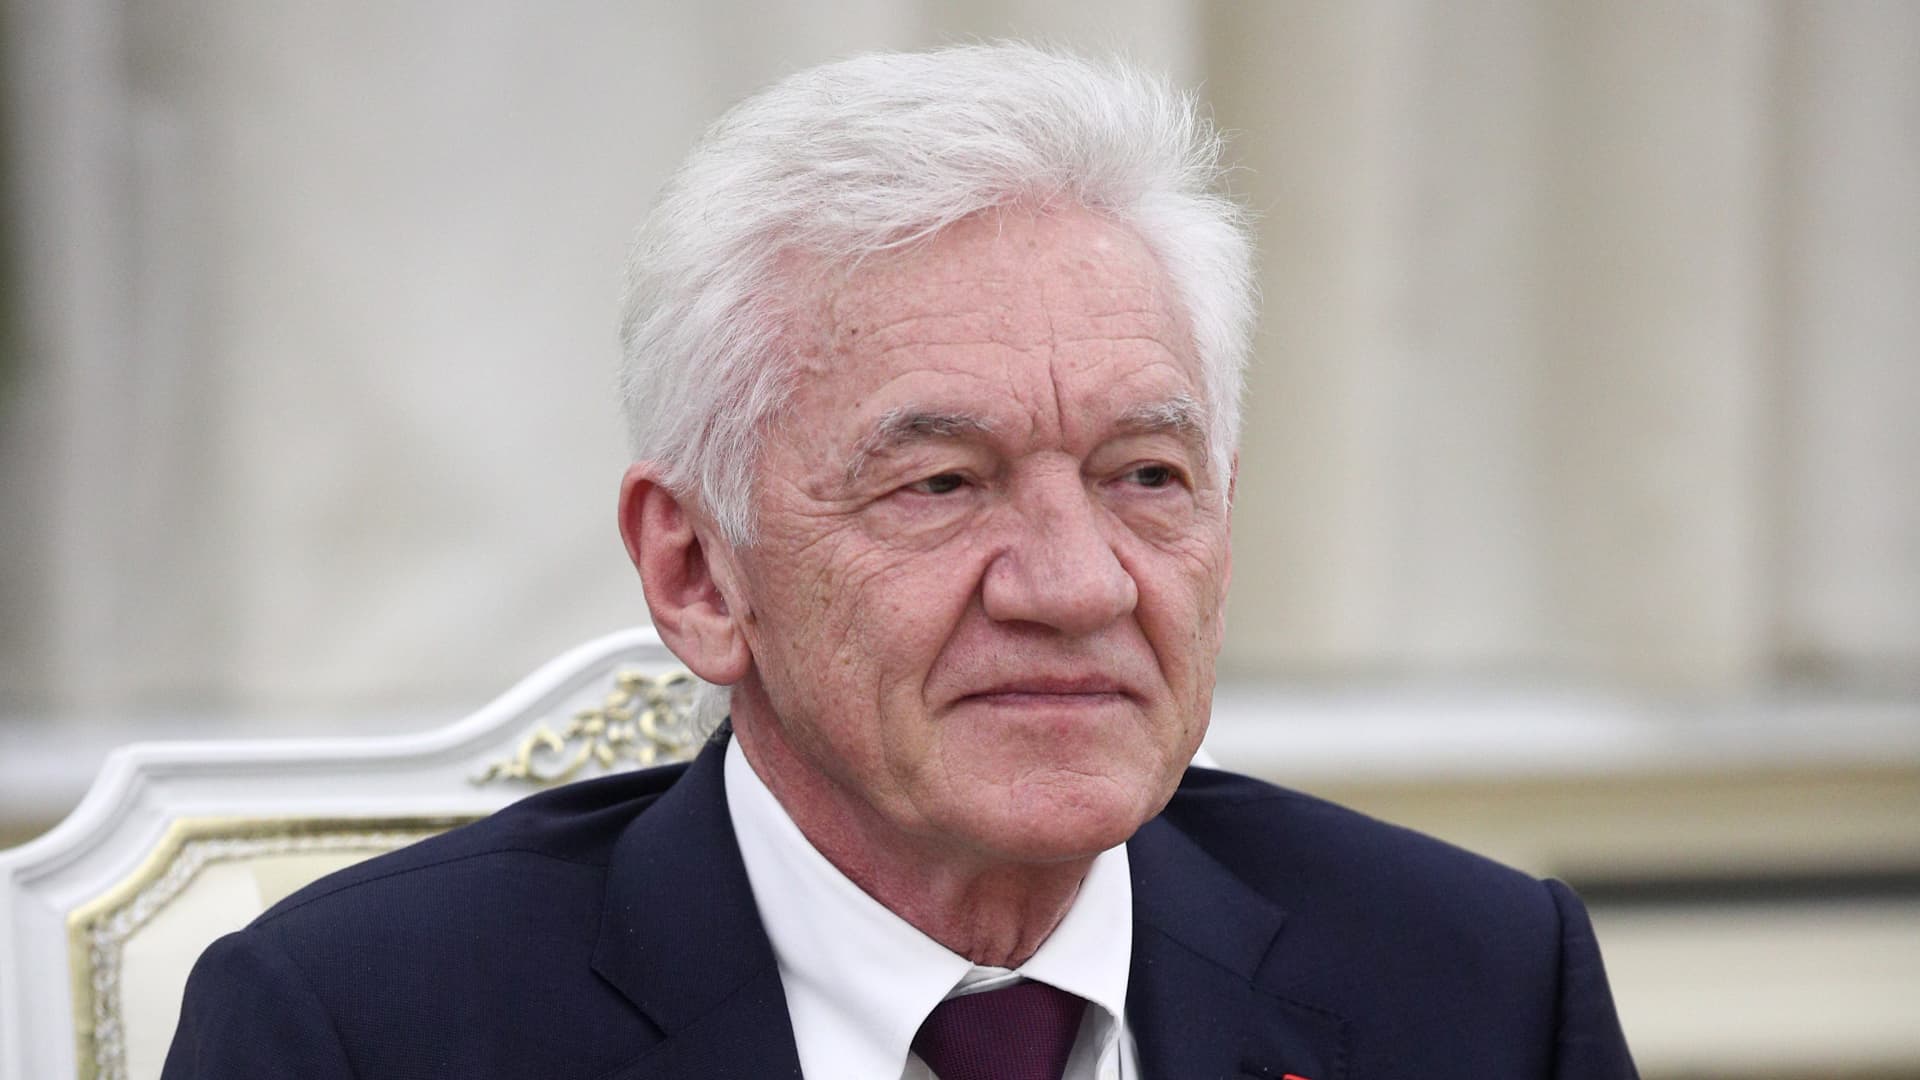 Gennady Timchenko, a member of the Board of Directors at Novatek and Sibur Holding, attends a session following ceremonies to sign agreements between the Government of the Russian Republic of Tatarstan and Sibur Holding, and TAIF and Sibur Holding.